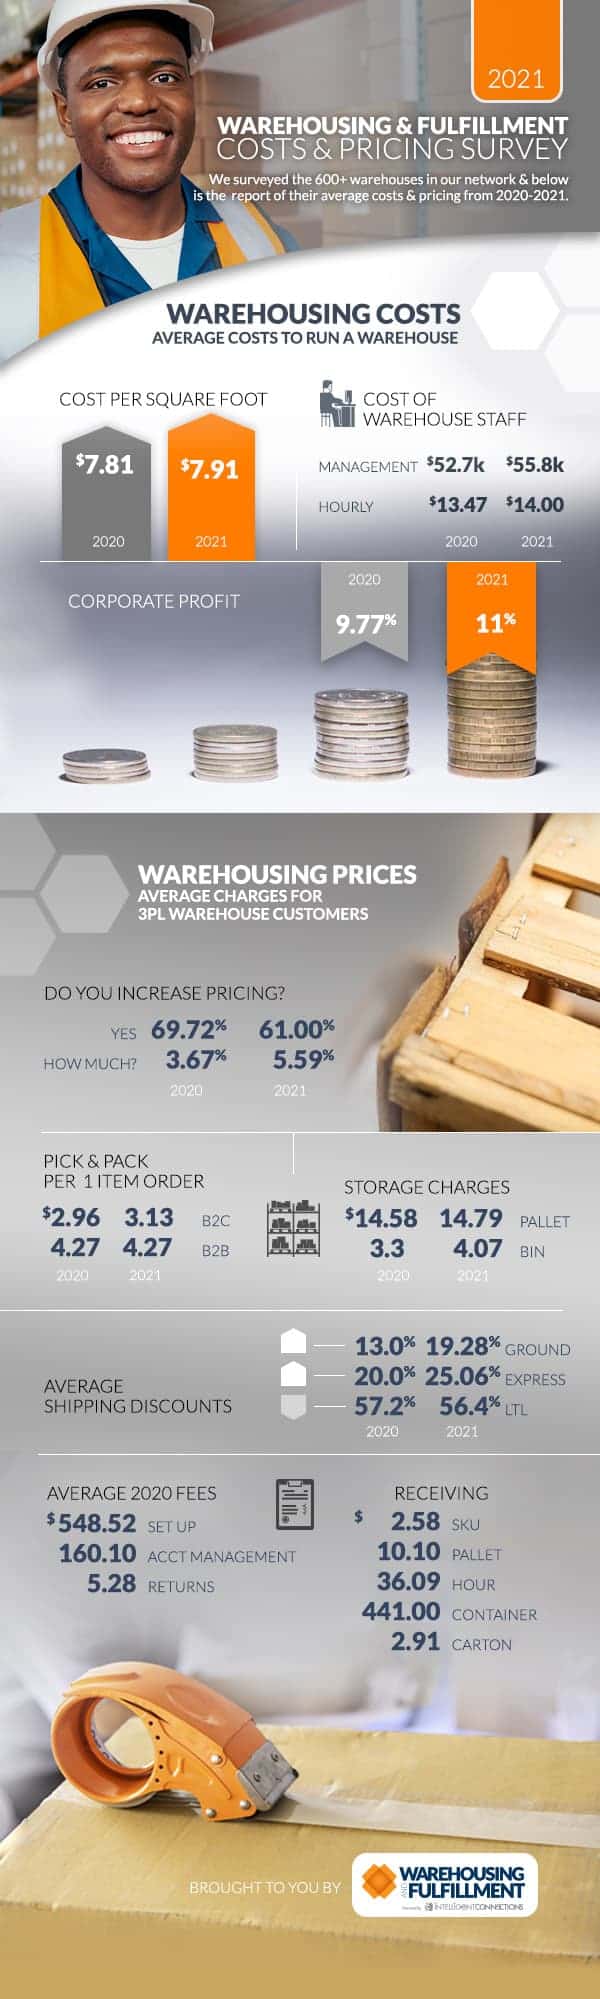 2021 3PL Warehouse Costs